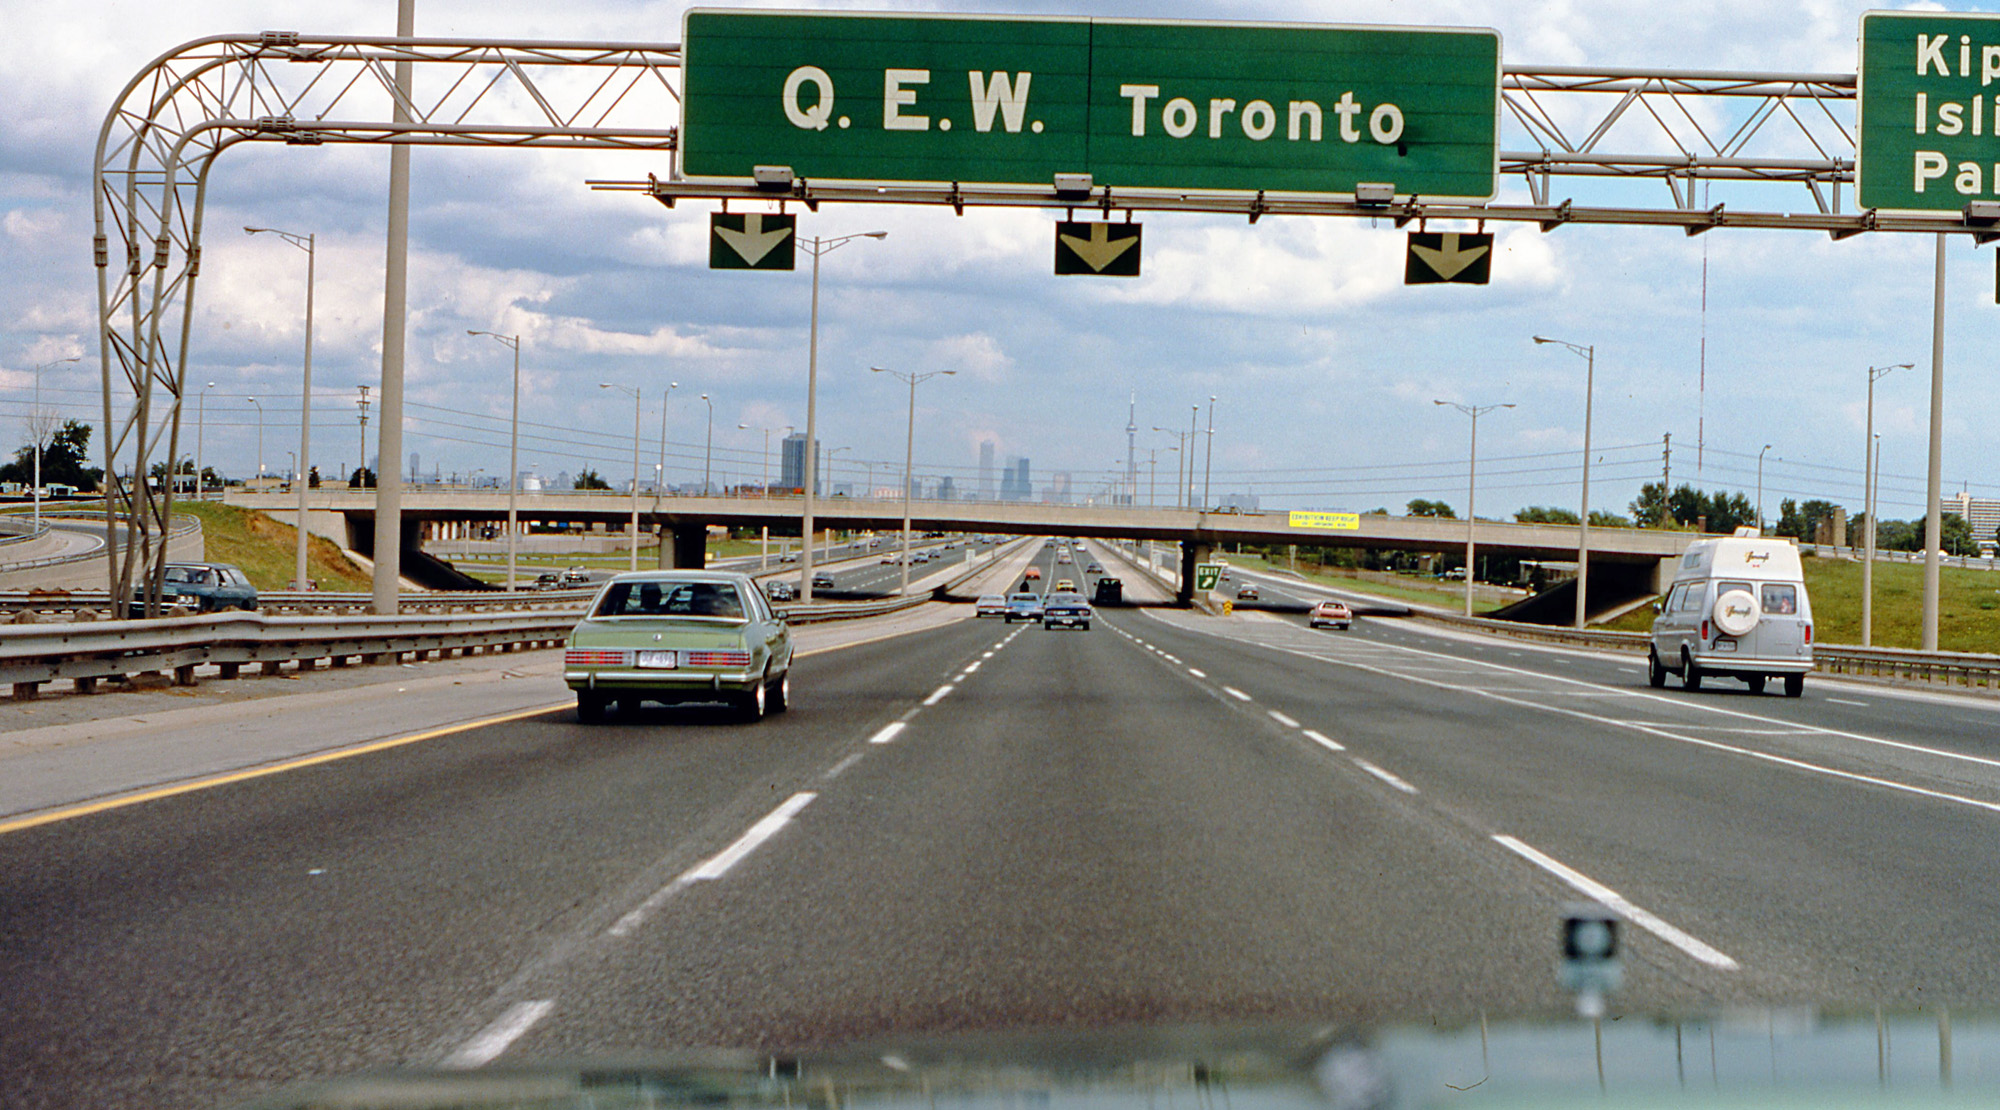 This is the first of three submissions, taken from the driver's seat on a trip eastbound on the QEW to Toronto (Queen Elizabeth Way, opened as the first concrete controlled-access divided highway in Canada, between Toronto and Niagara Falls, by the King and Queen of England in 1939). This was Sunday morning, Labour Day weekend, 1979. That's why the highway is surprisingly open, but there're still enough period vehicles to see.

These shots were a lot harder to do than today, as I had to look through the viewfinder of my SLR film camera. When you're young, stupidity in the mirror is closer than it appears. View full size.